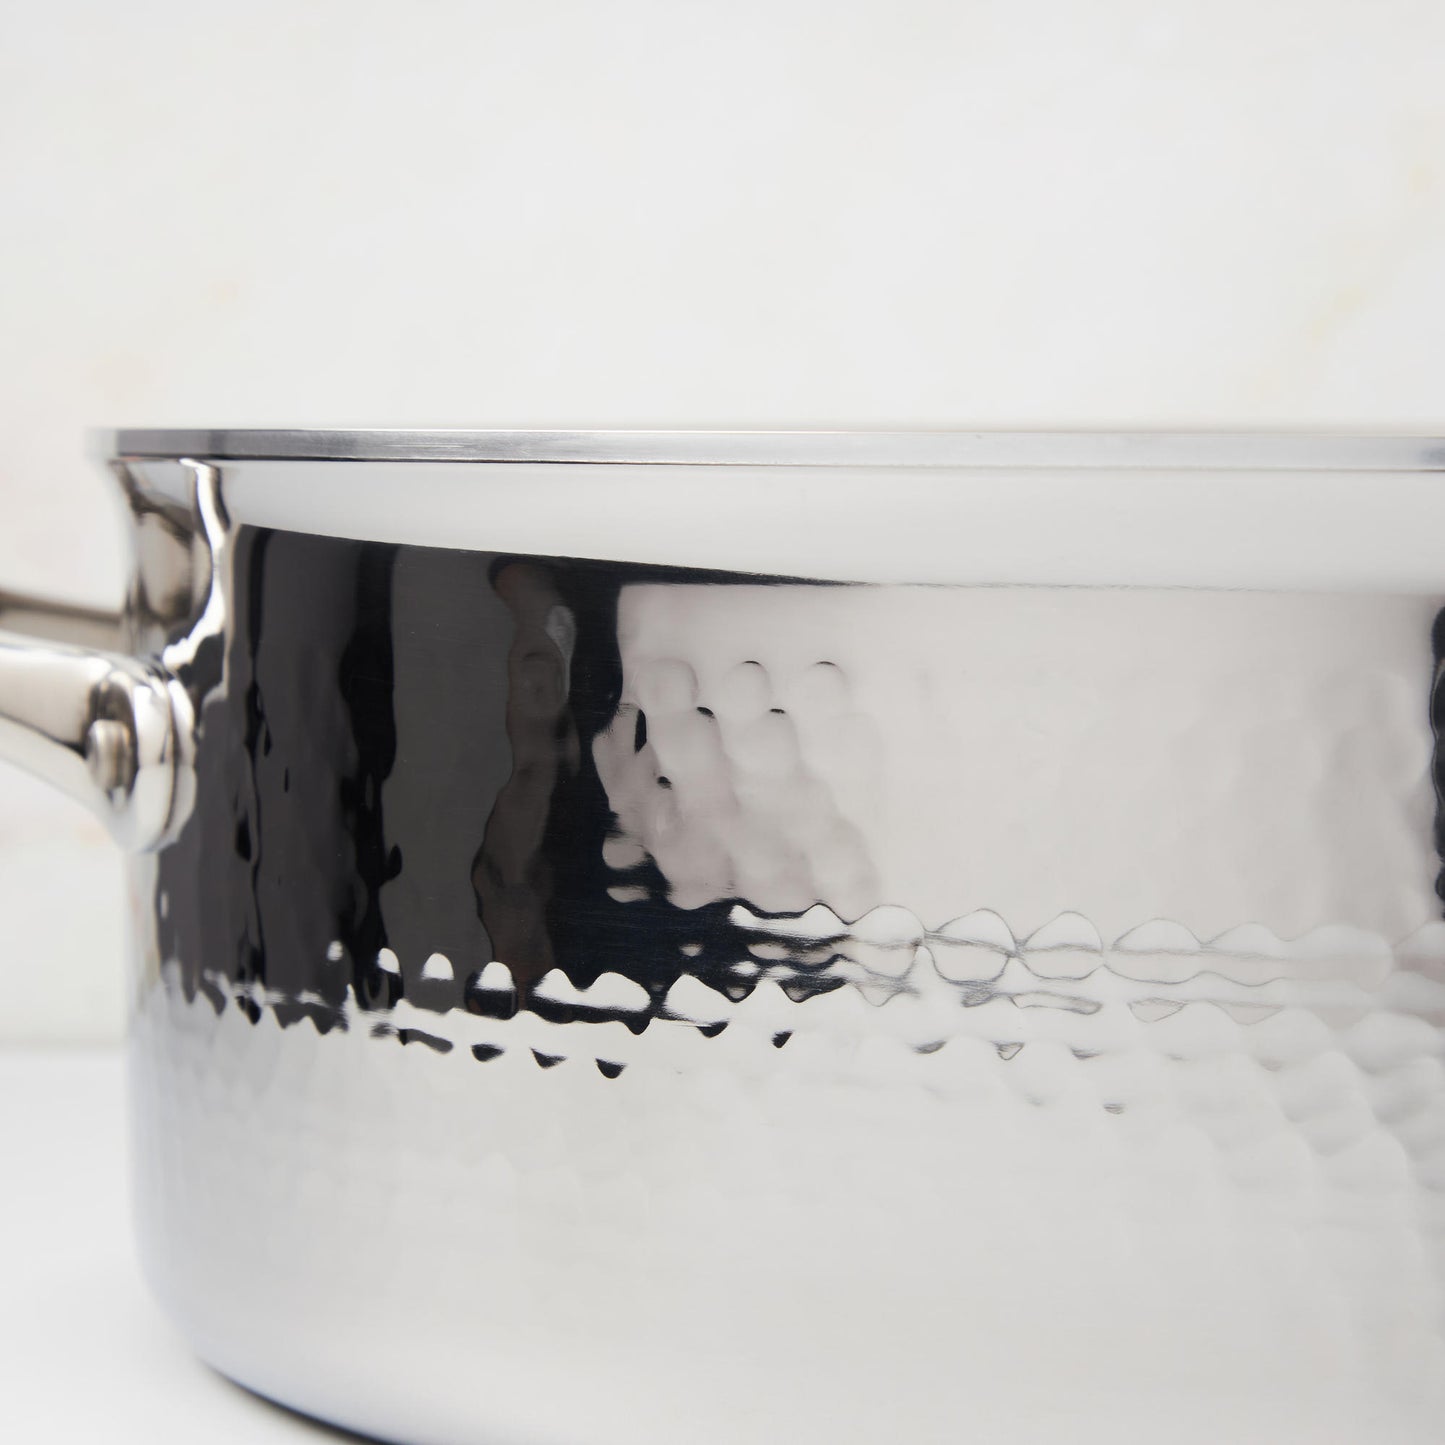 Hammering increases strength and beauty of clad stainless cookware set steel  from Ruffoni